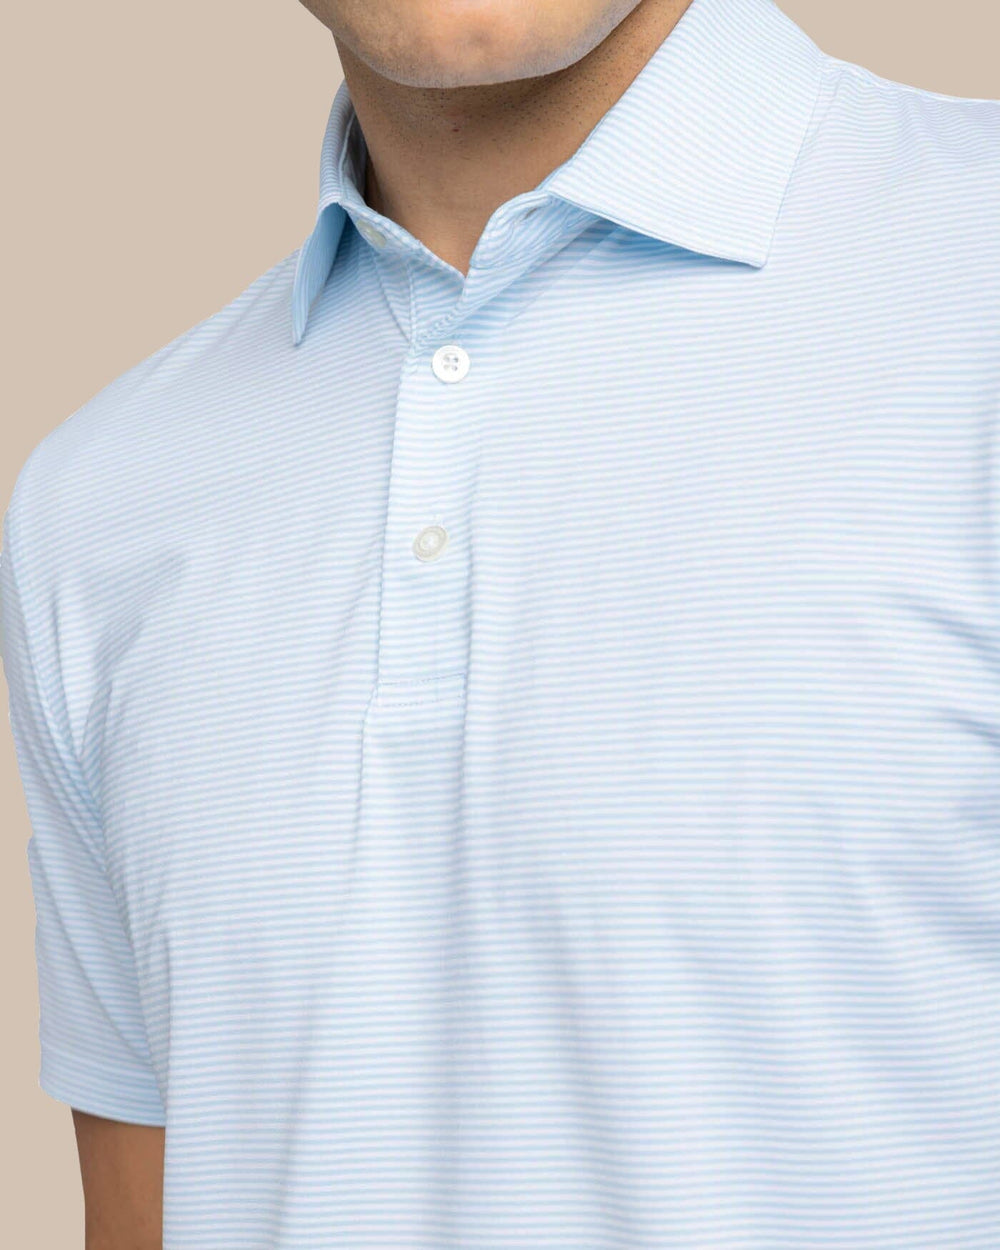 The detail view of the Southern Tide brrr-eeze Meadowbrook Stripe Polo by Southern Tide - Clearwater Blue